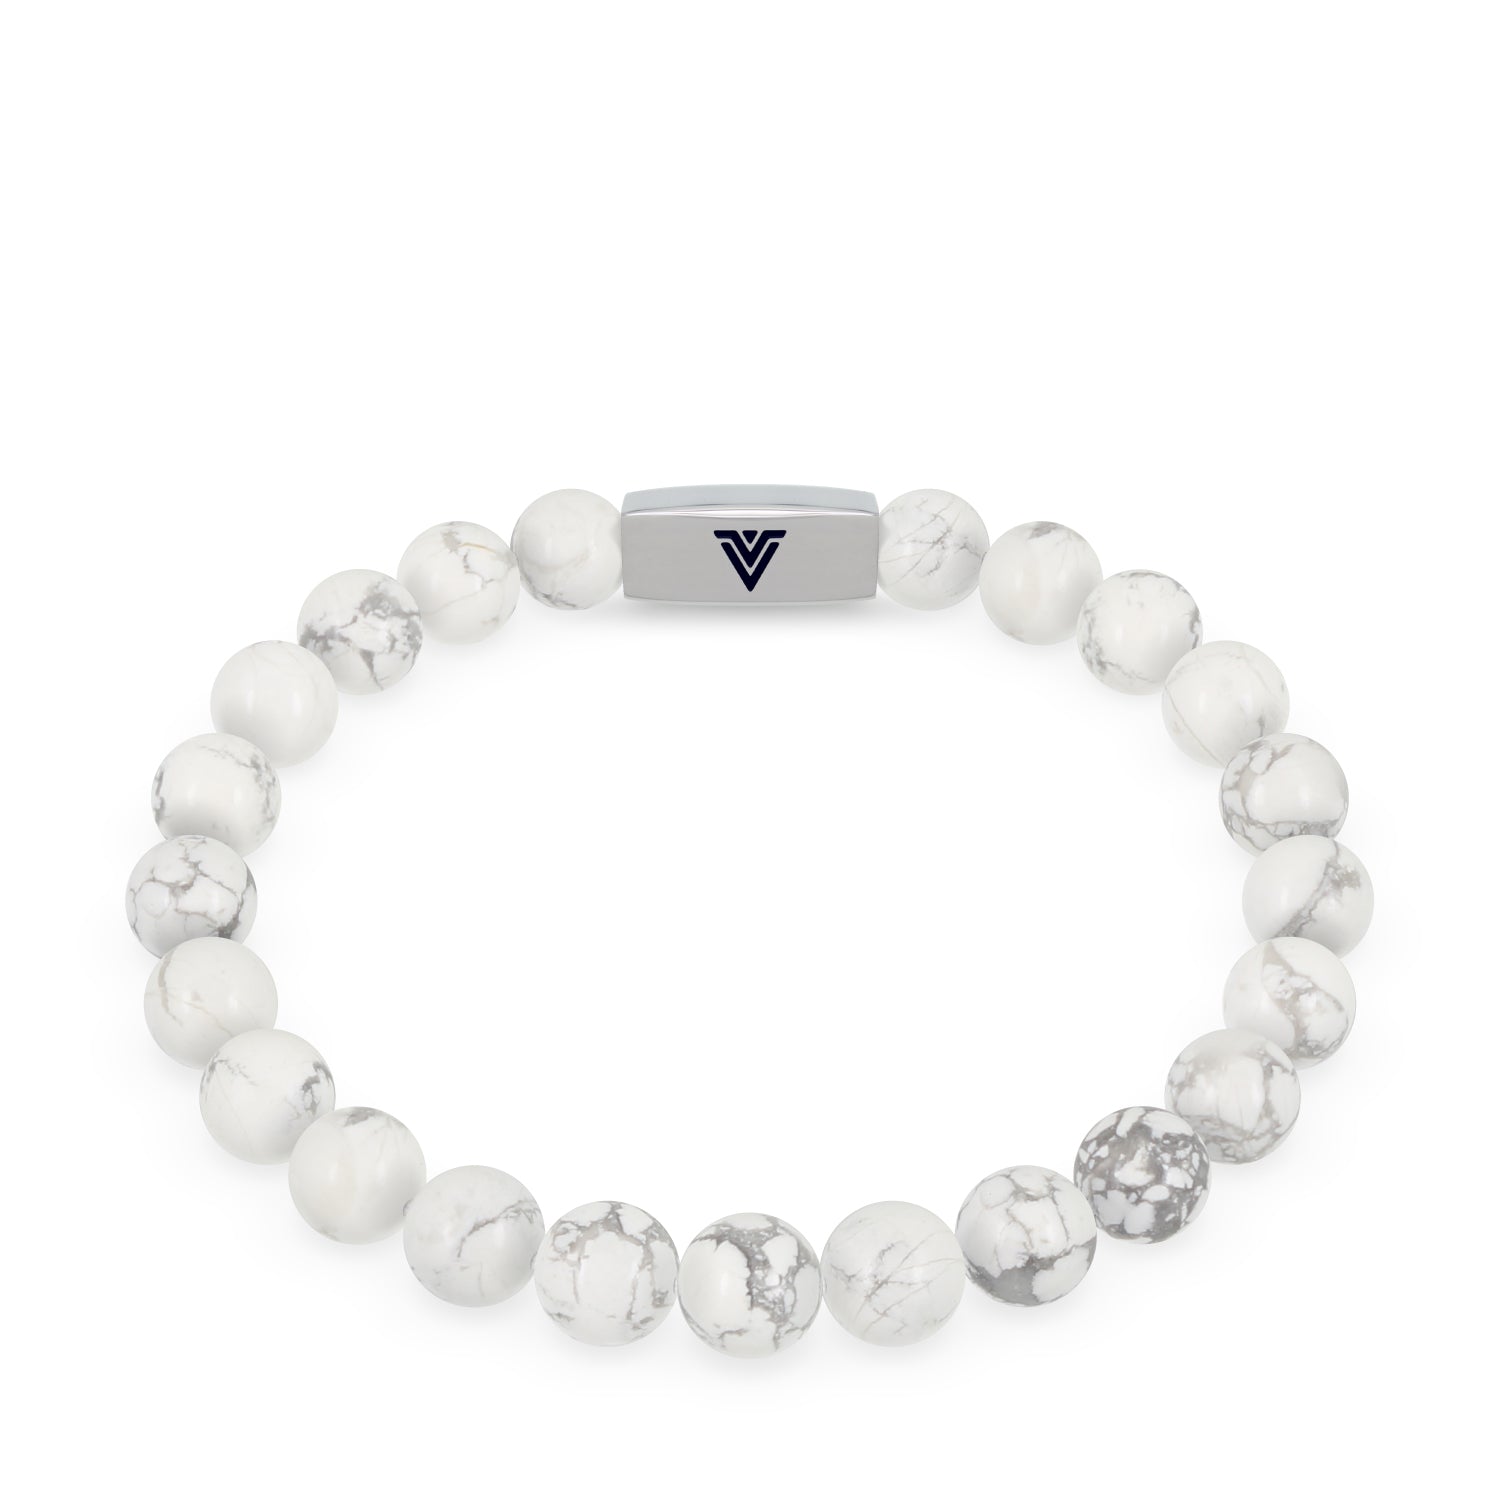 Front view of an 8mm Howlite beaded stretch bracelet with silver stainless steel logo bead made by Voltlin